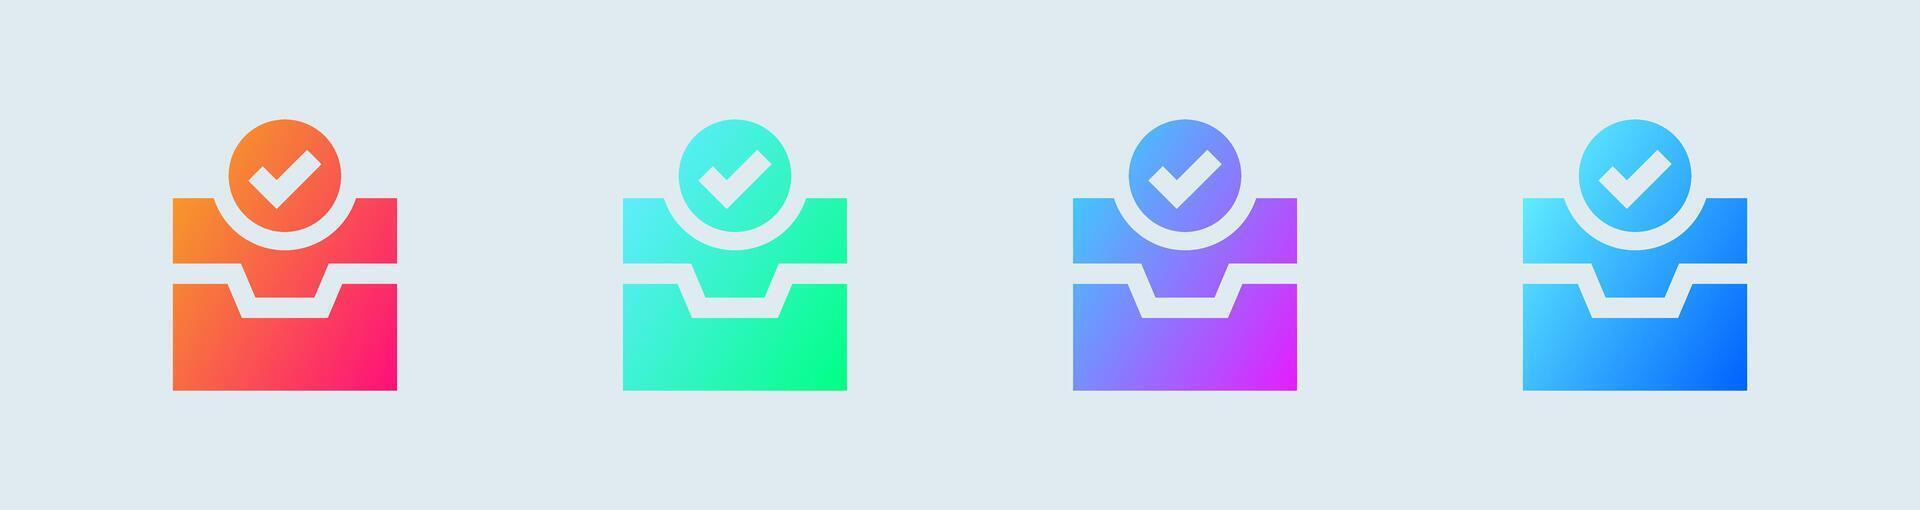 Direct message solid icon in gradient colors. Inbox signs illustration. vector